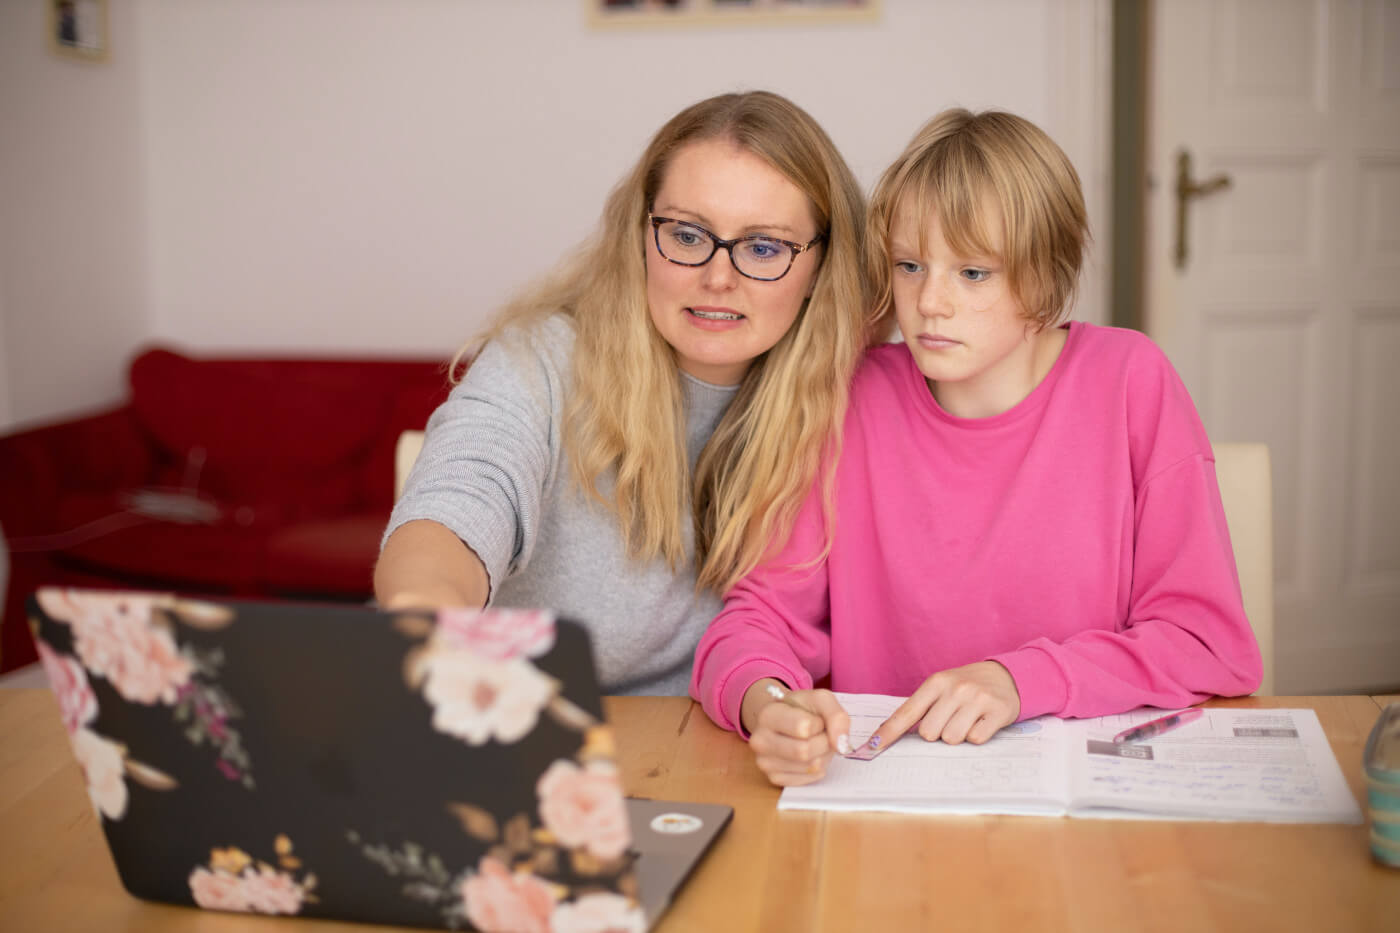 Does My Child Need A Tutor?